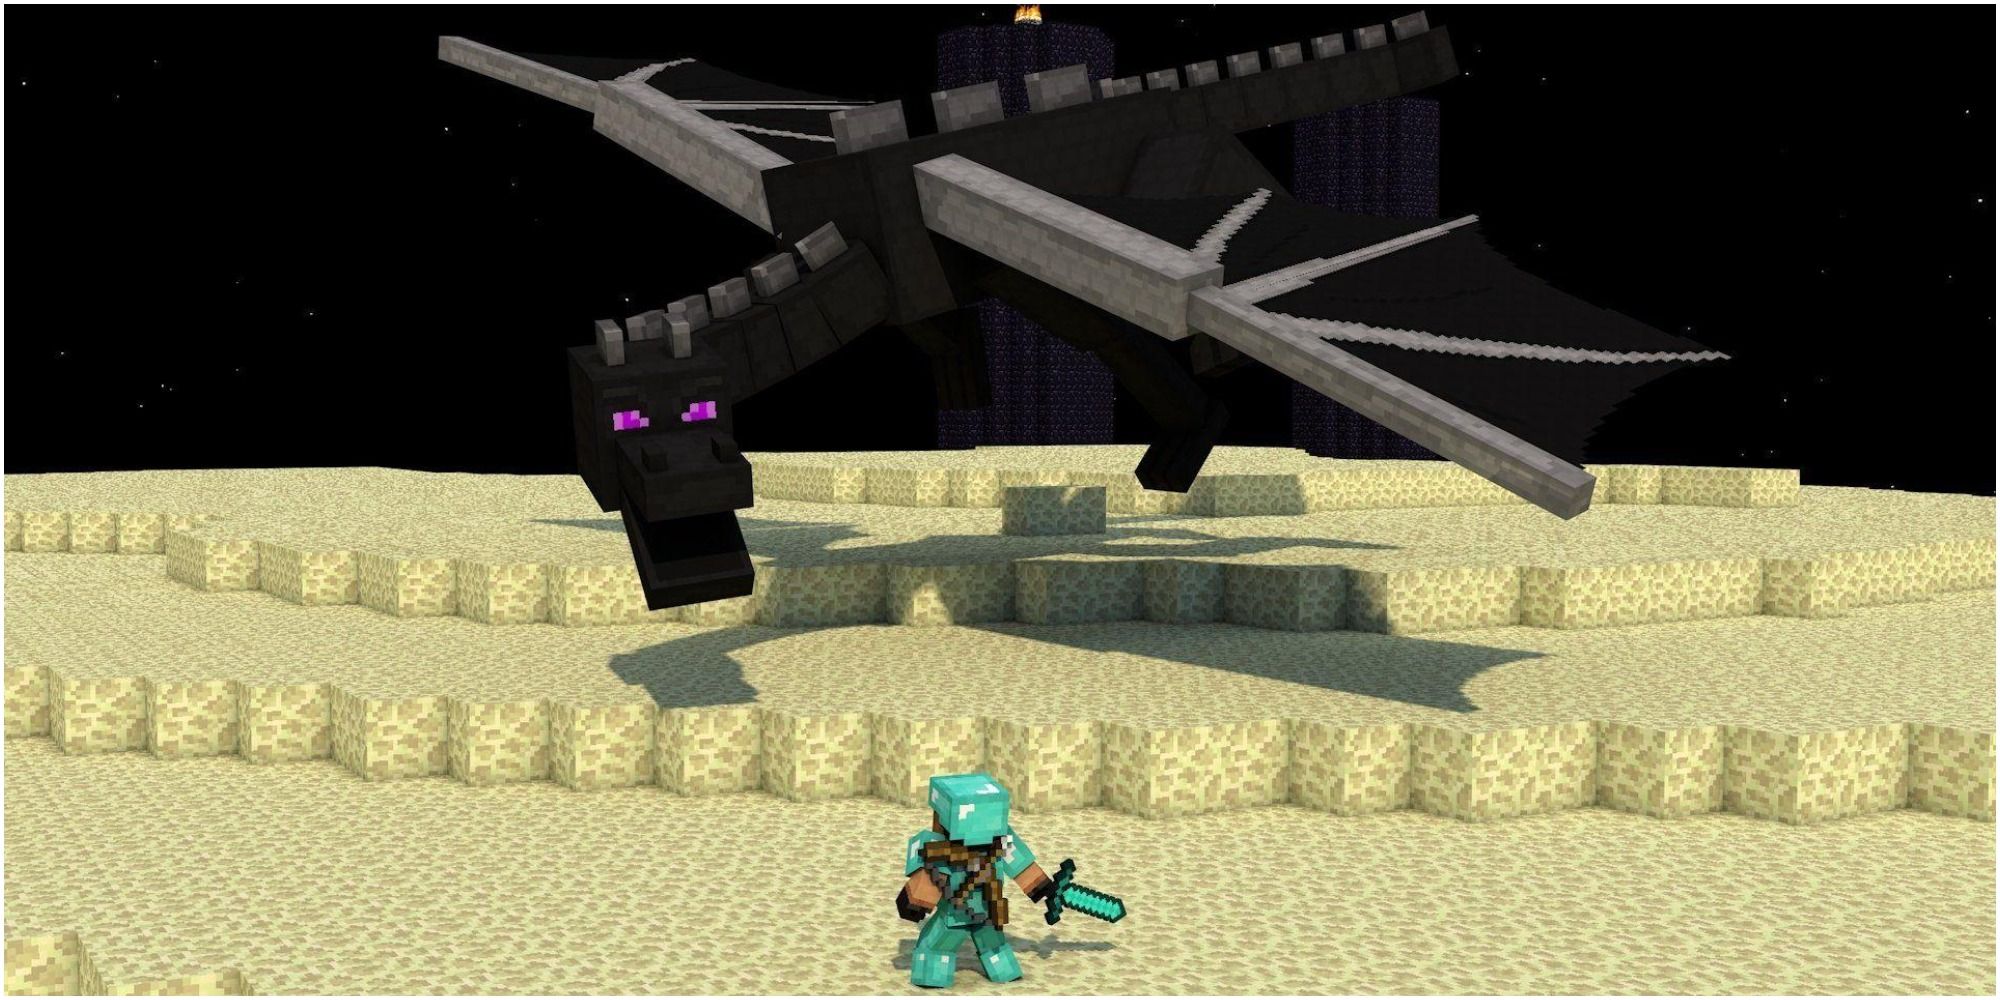 ender dragon from minecraft attacking steve